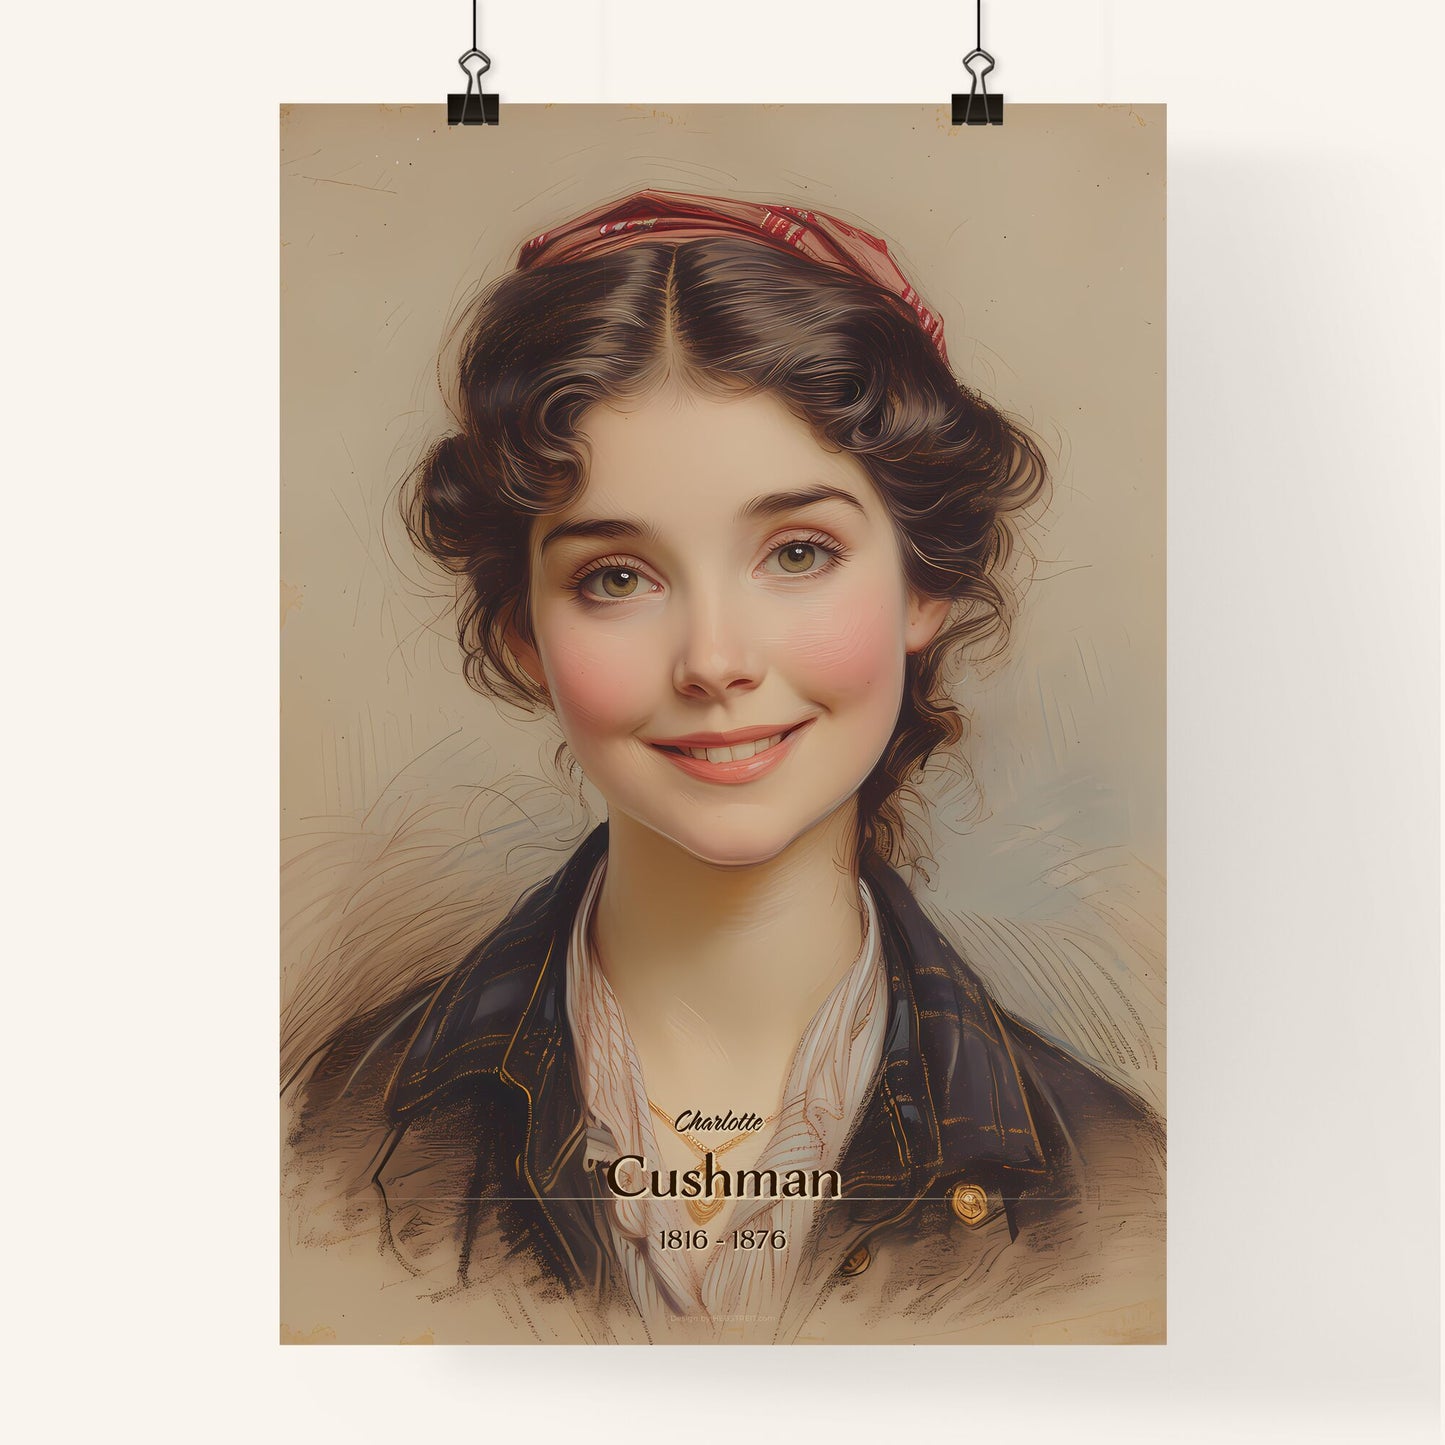 Charlotte, Cushman, 1816 - 1876, A Poster of a woman smiling with a red bow on her head Default Title